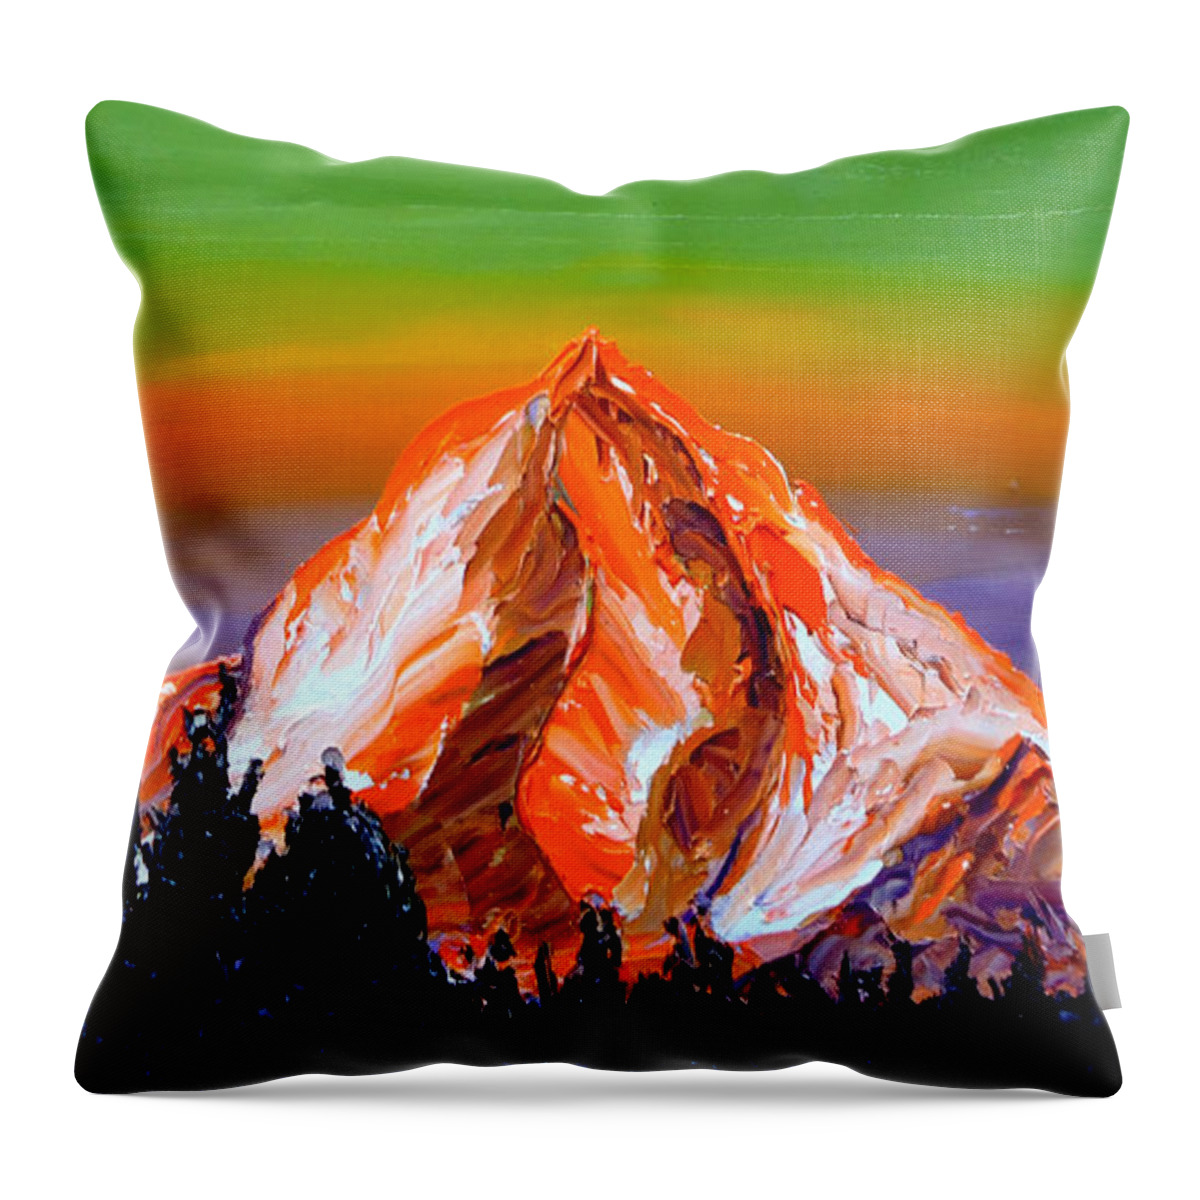  Throw Pillow featuring the painting Mount Hood At Dusk 10 by James Dunbar